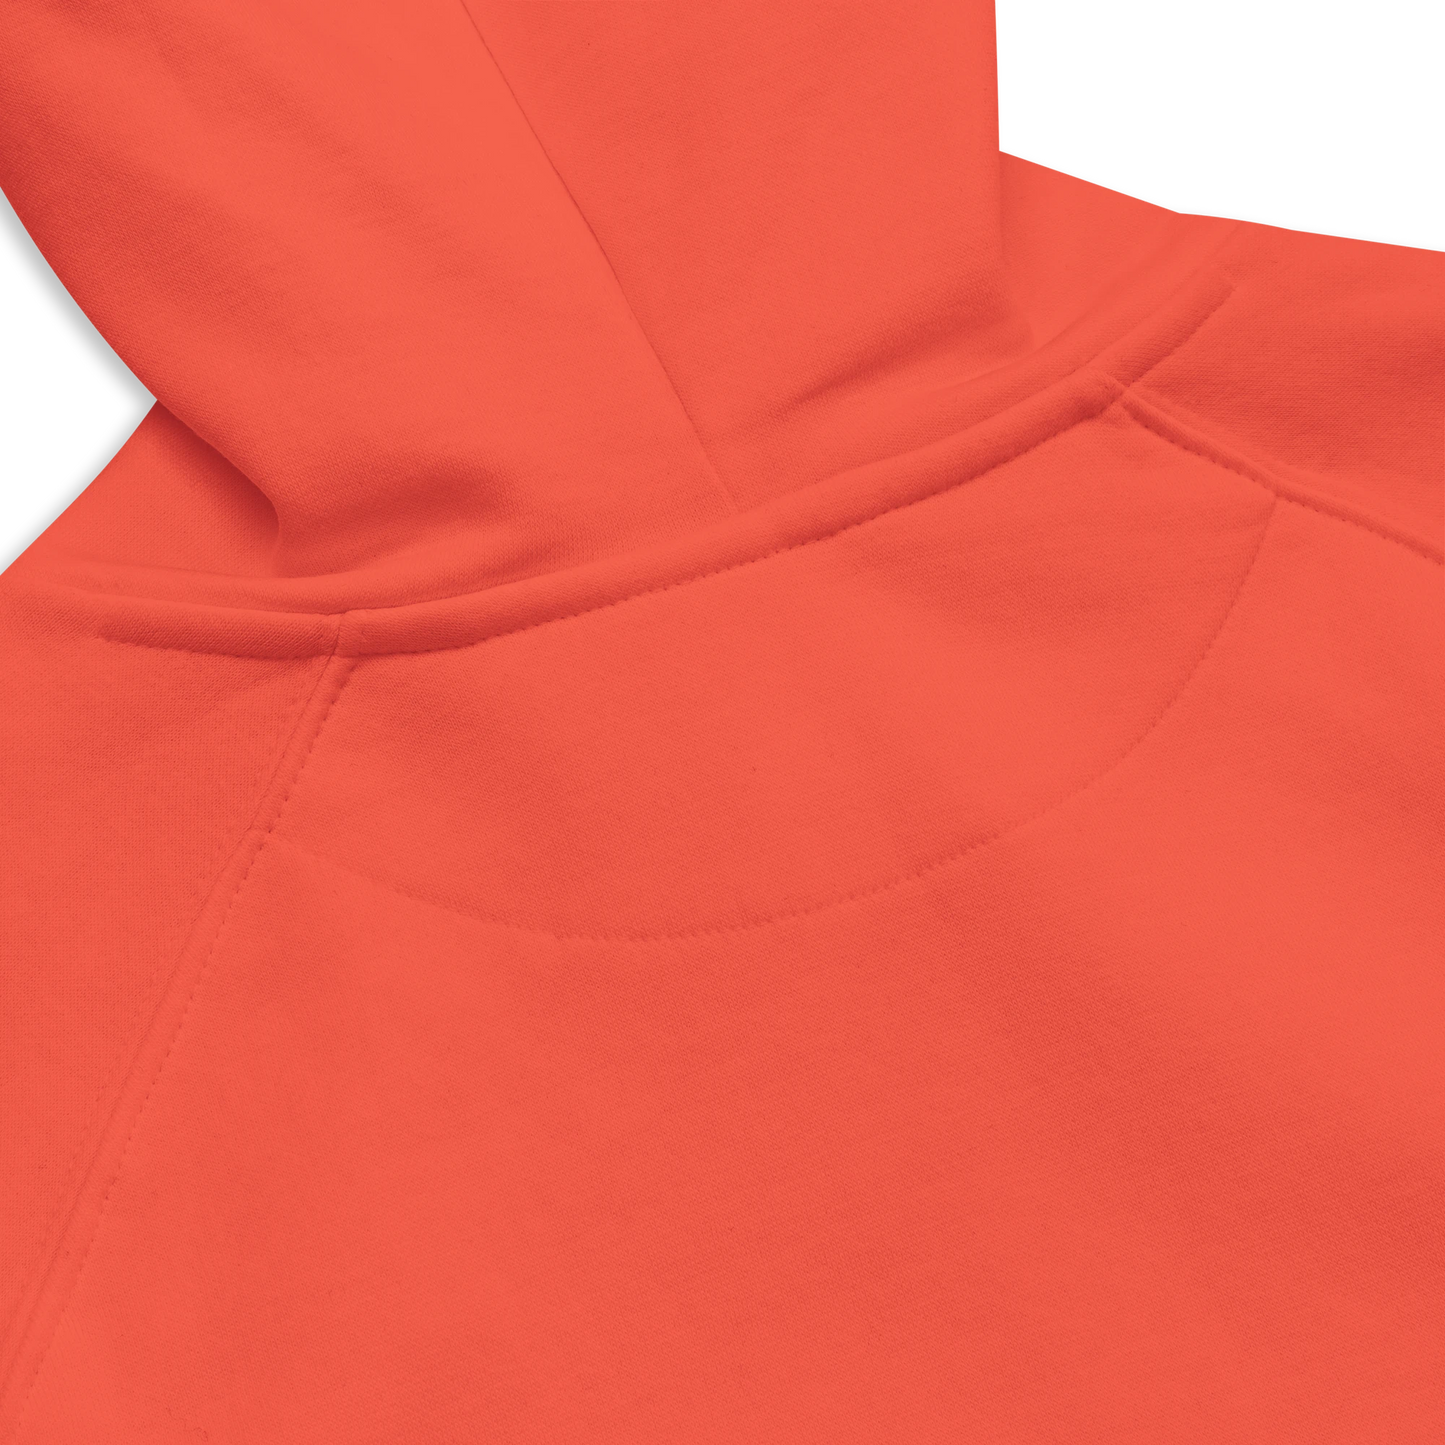 Dress for the job you want premium hoodie product details 2 product details product details 2